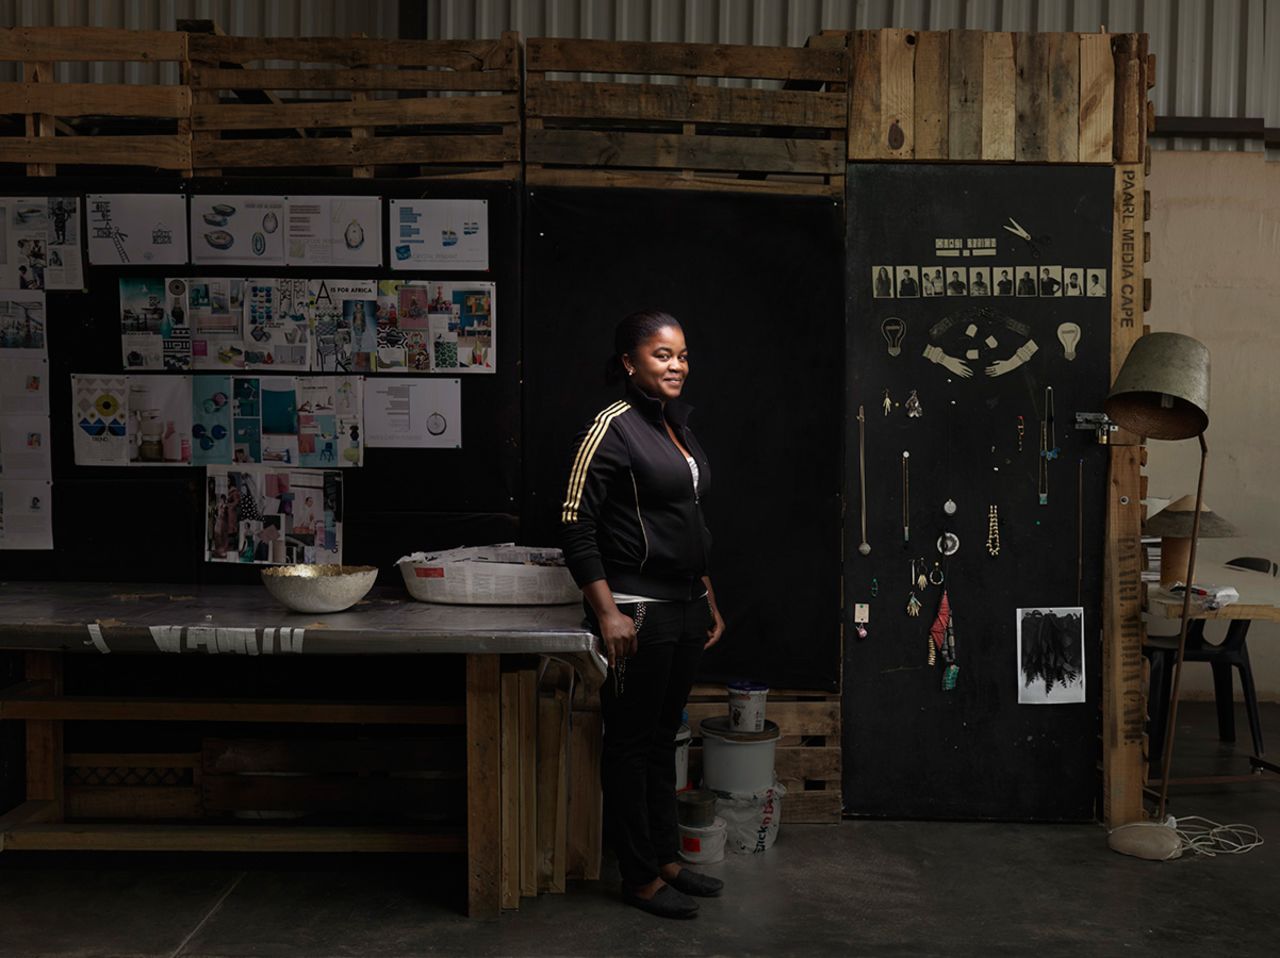 Cebsile Ndzimandze (pictured) is one of the artisans working for Quazi Design since 2012.